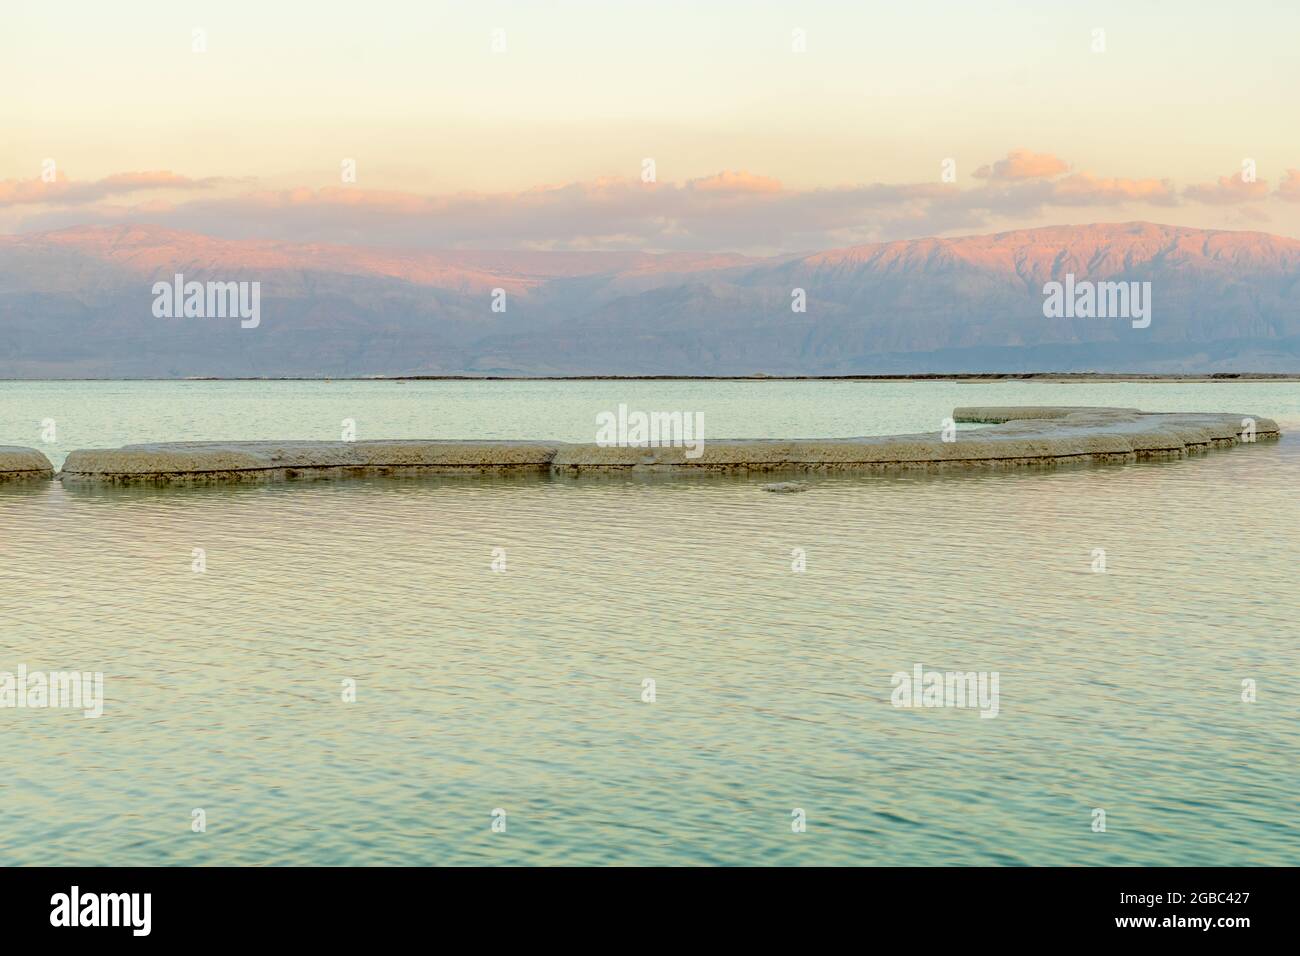 Sunset view of salt formations in the Dead Sea, with the Edom Mountains in the background. Southern Israel Stock Photo